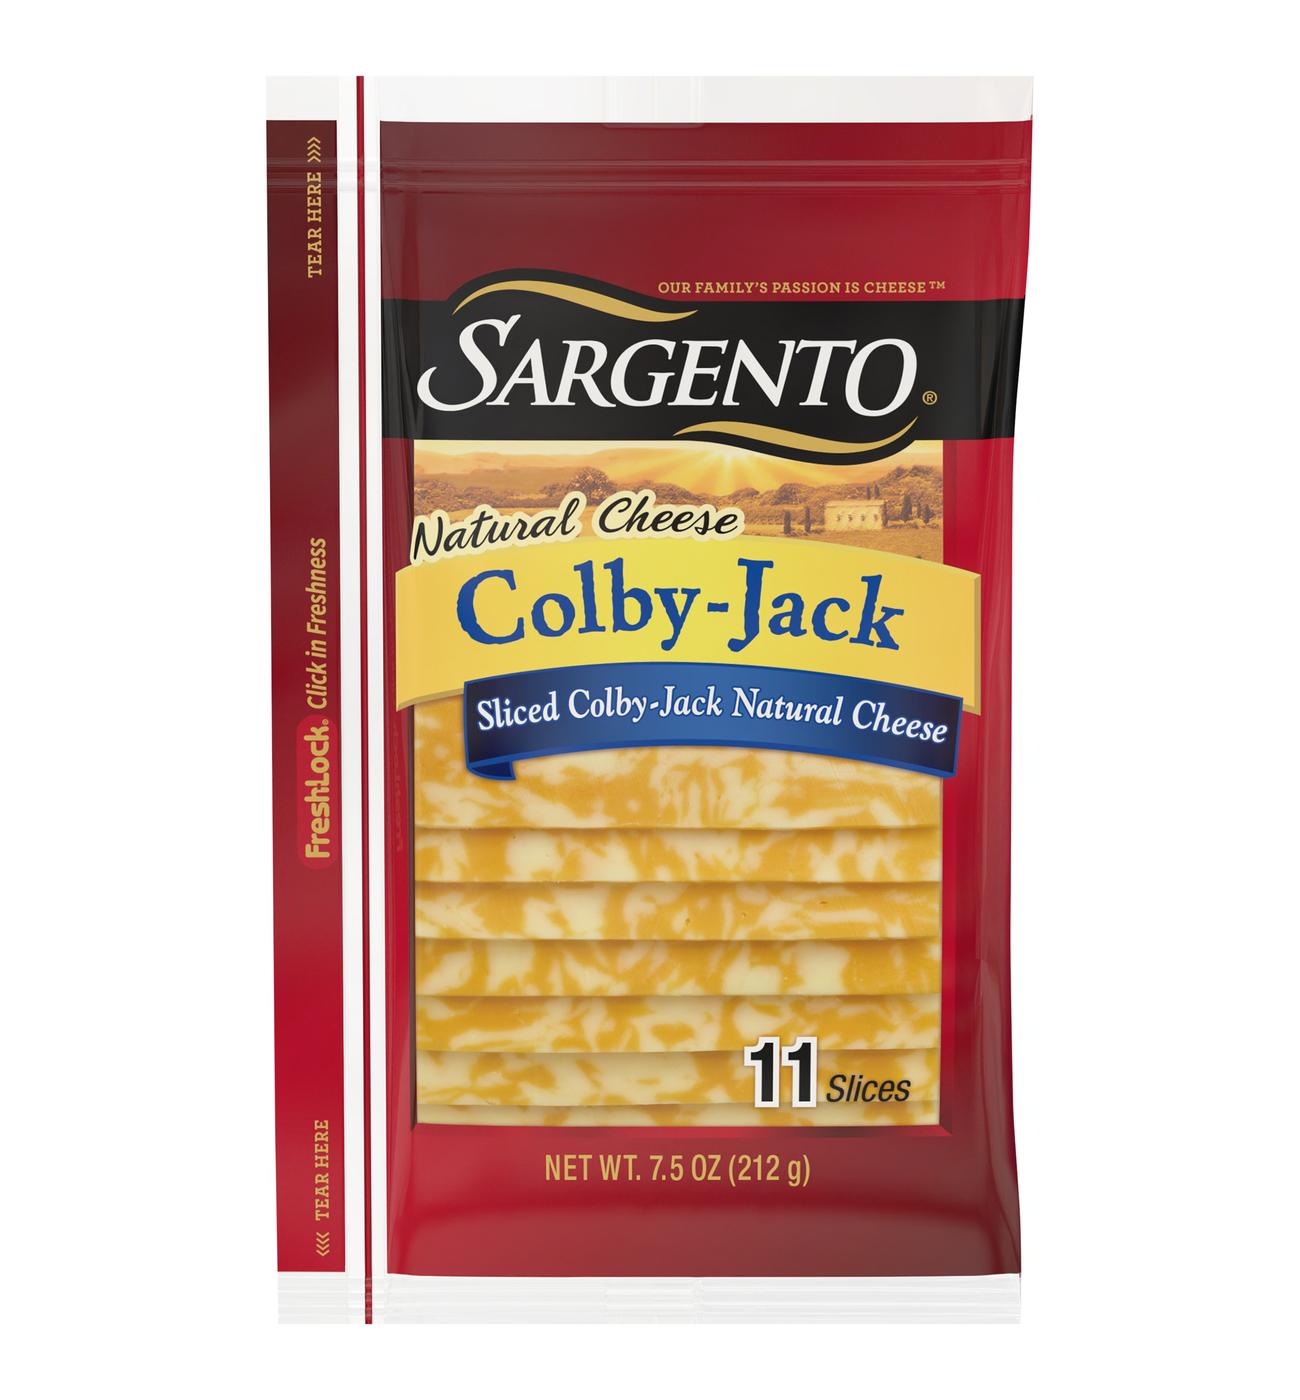 SARGENTO Colby Jack Sliced Cheese; image 1 of 2